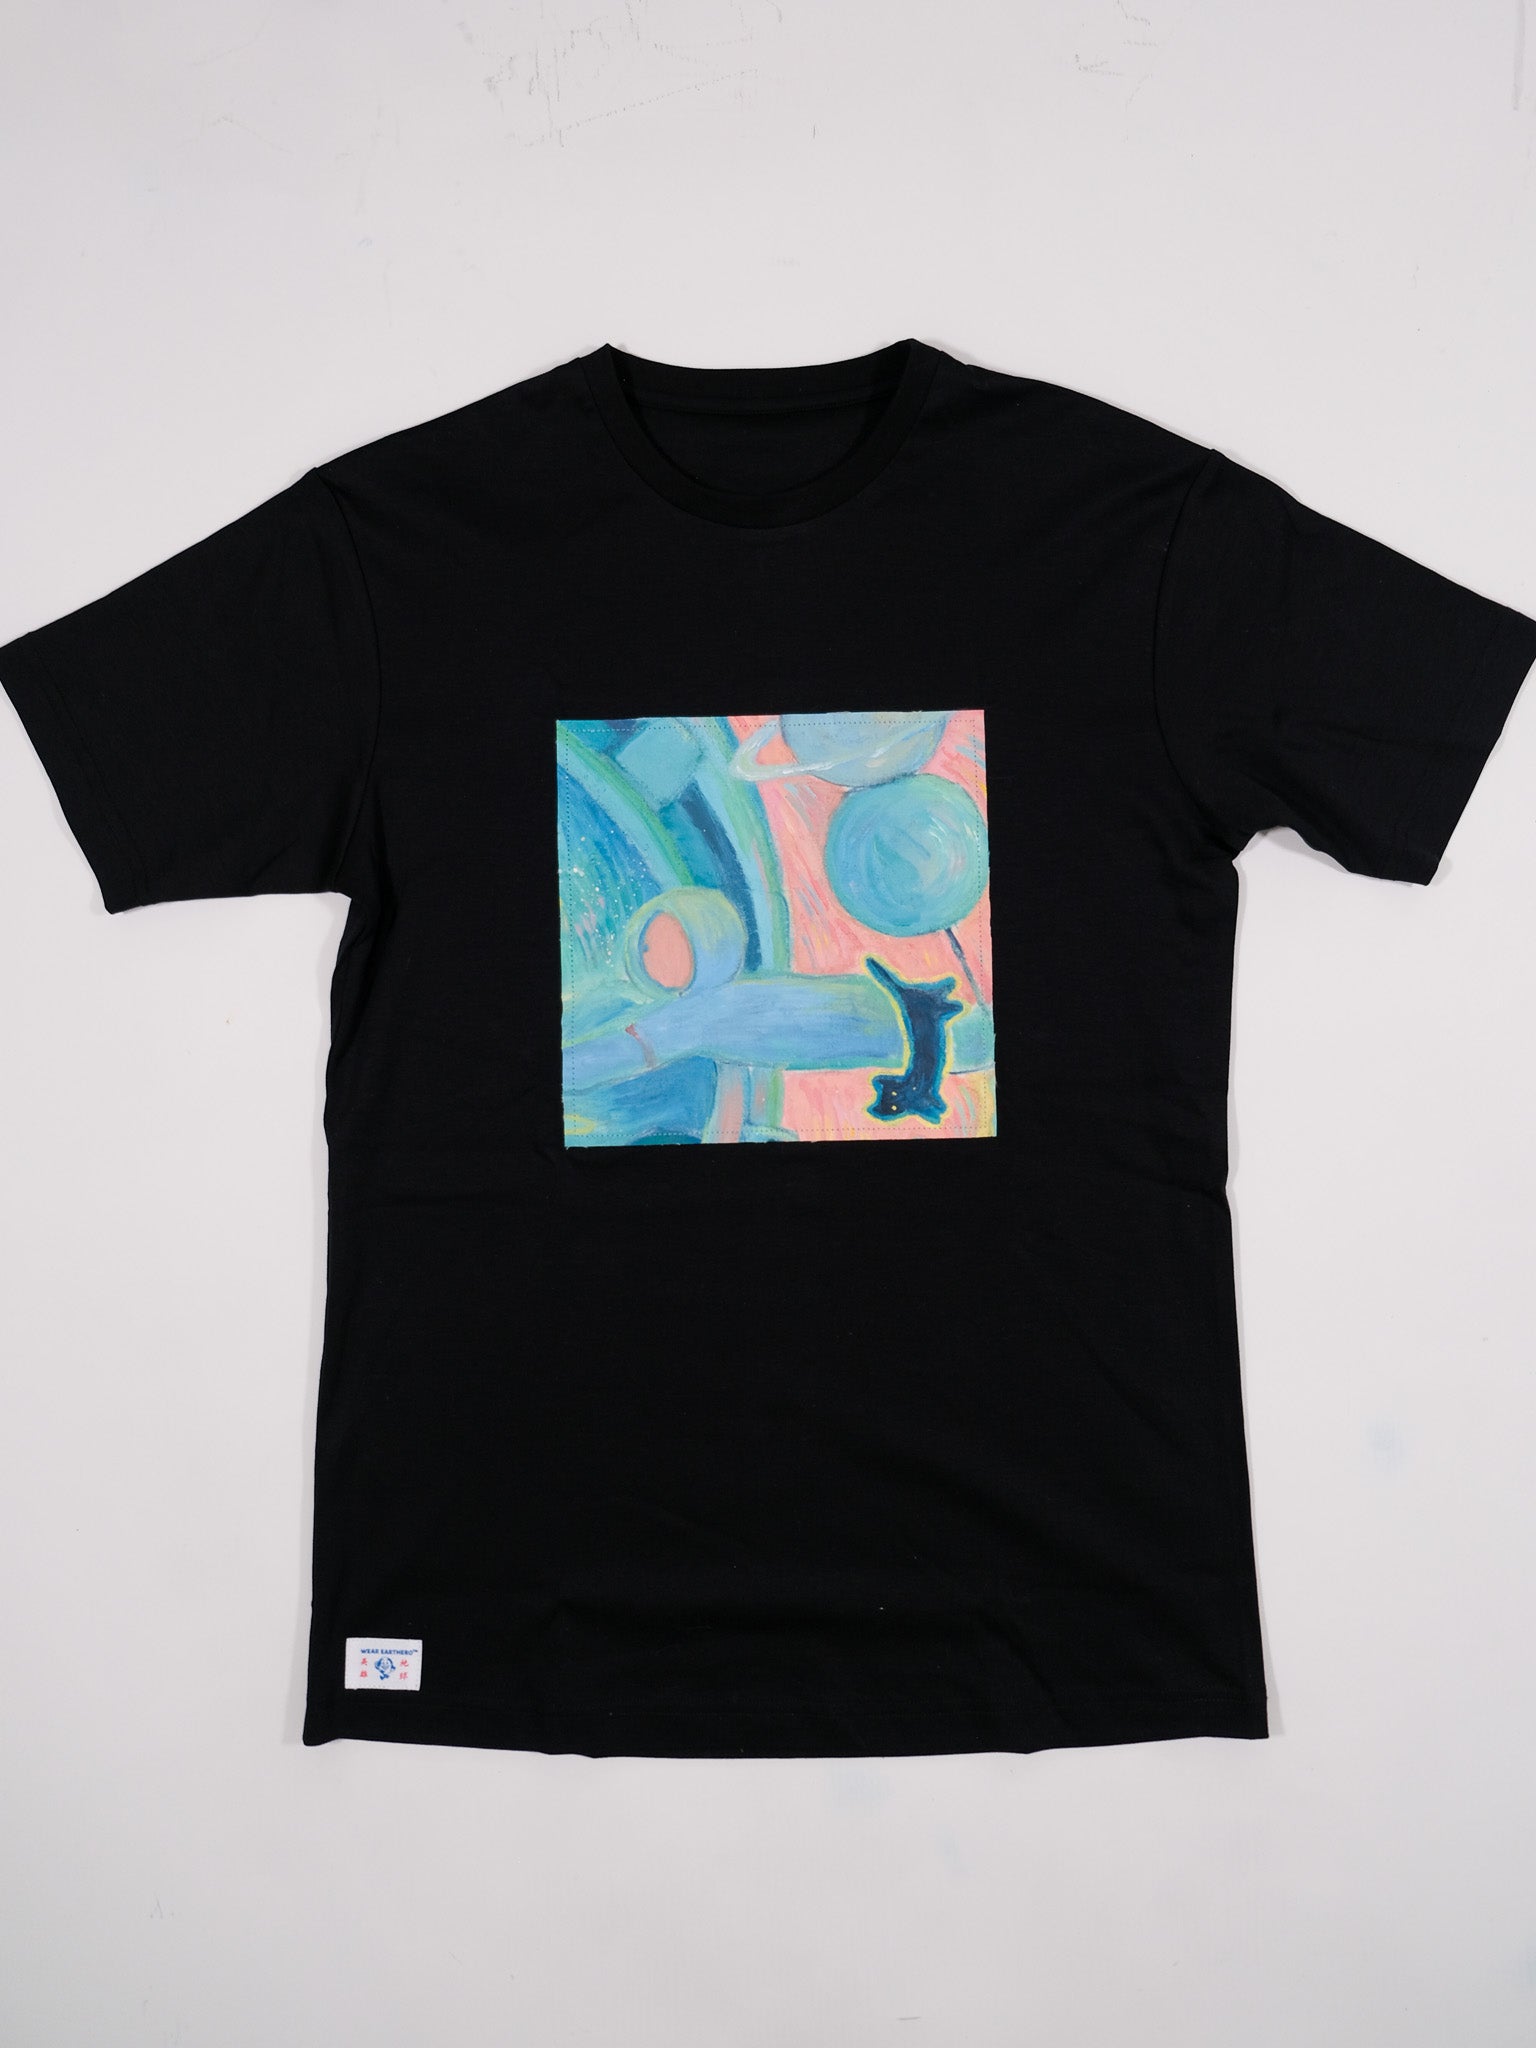 THREEFIRE - Daydream Believer Art-isan Collective Patched T-Shirt No. 6 Medium